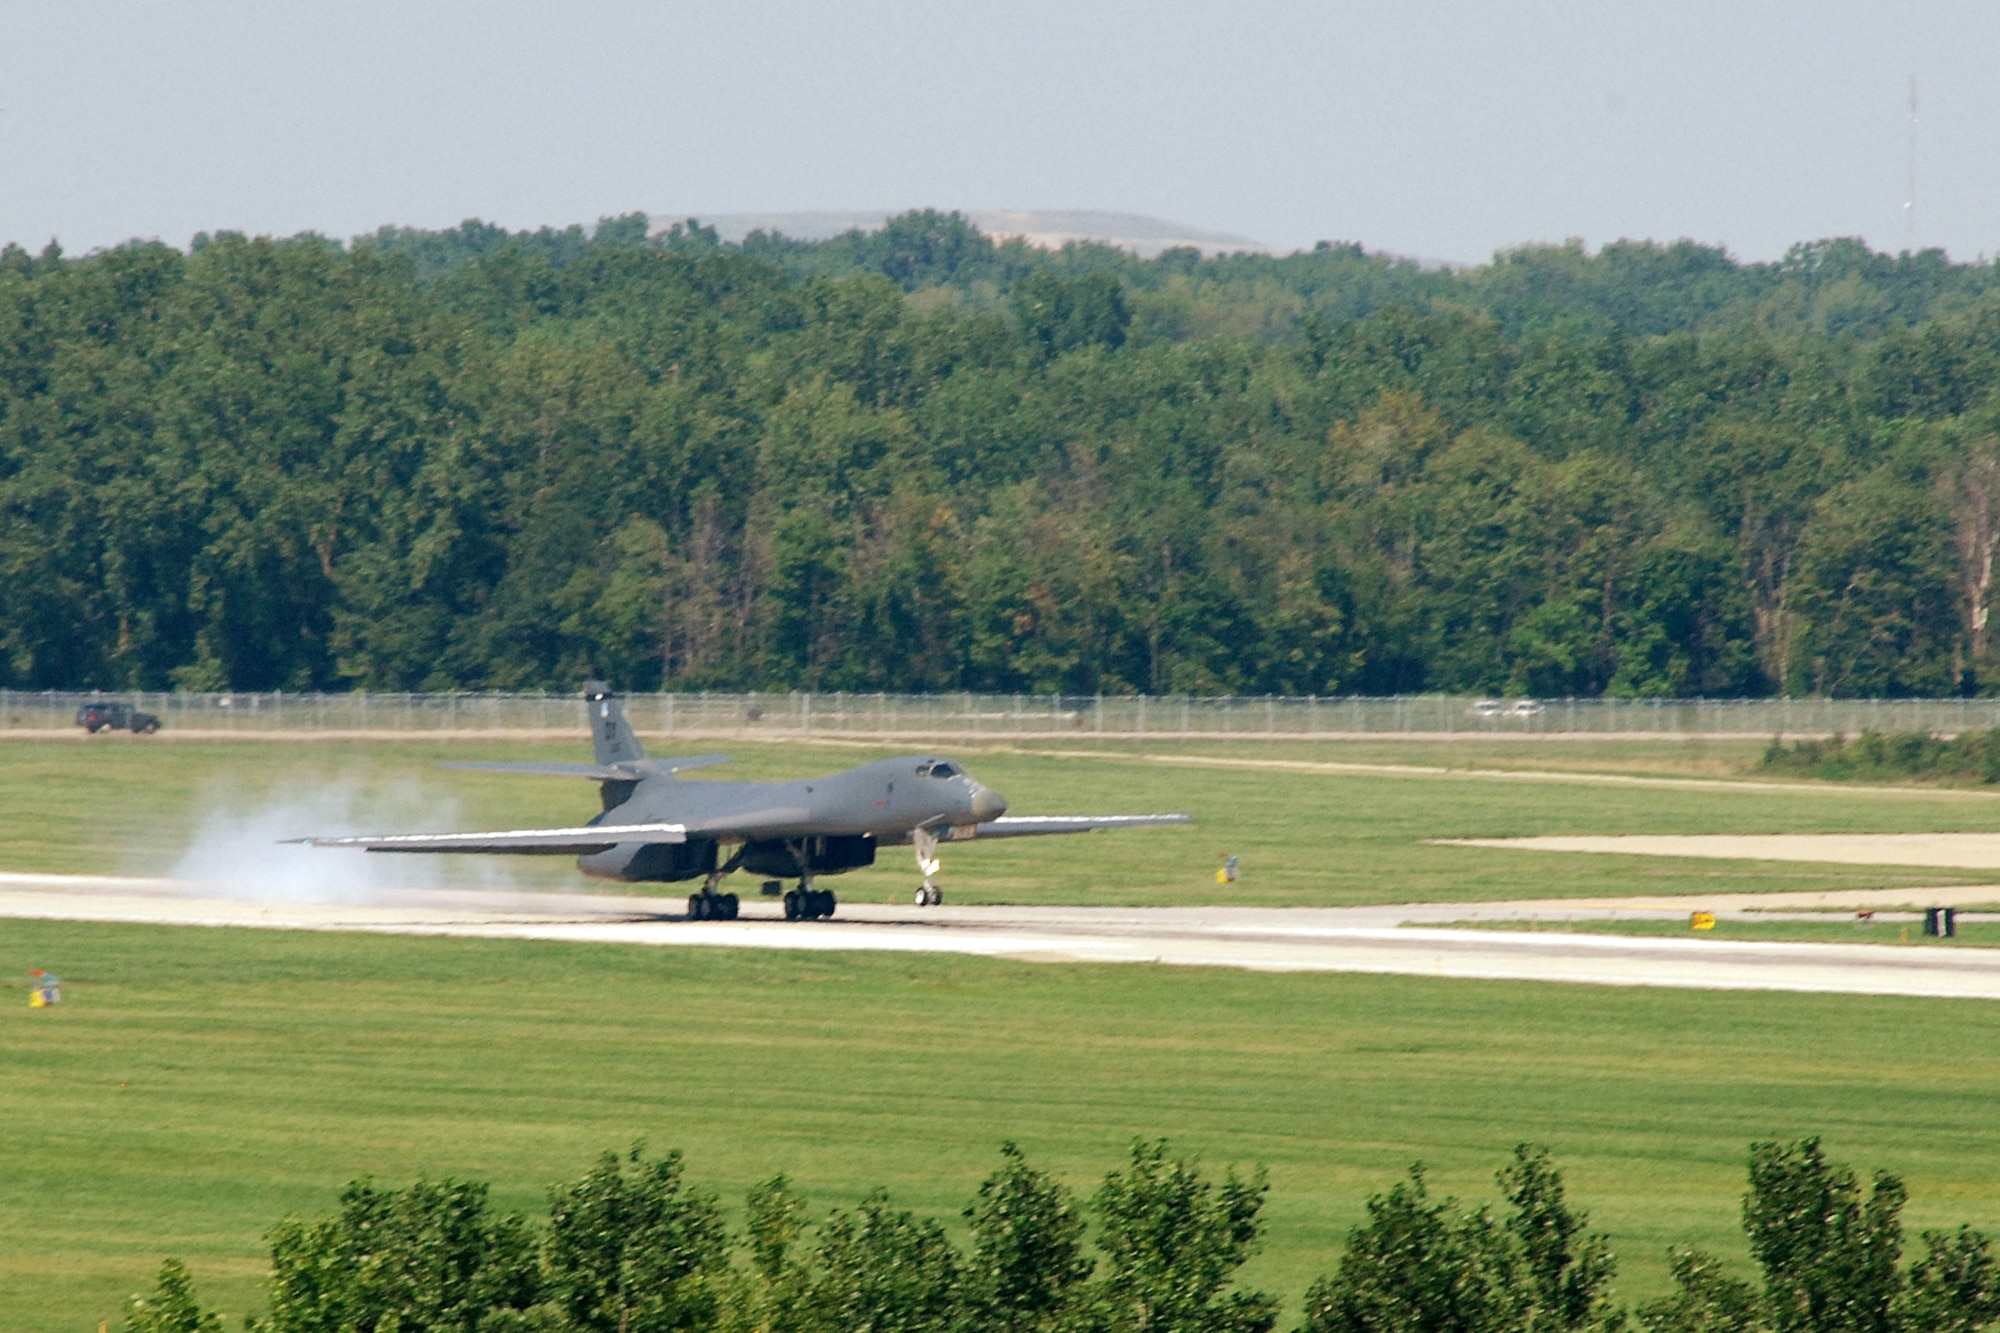 A B-1B Lancer from Dyess Air Force Base, Texas, lands at Selfridge Air National Guard Base, Mich., Aug. 19, 2011. The Lancer was visiting the base for the Selfridge Air Show and Open House, Aug. 20-21. (USAF photo by John S. Swanson)